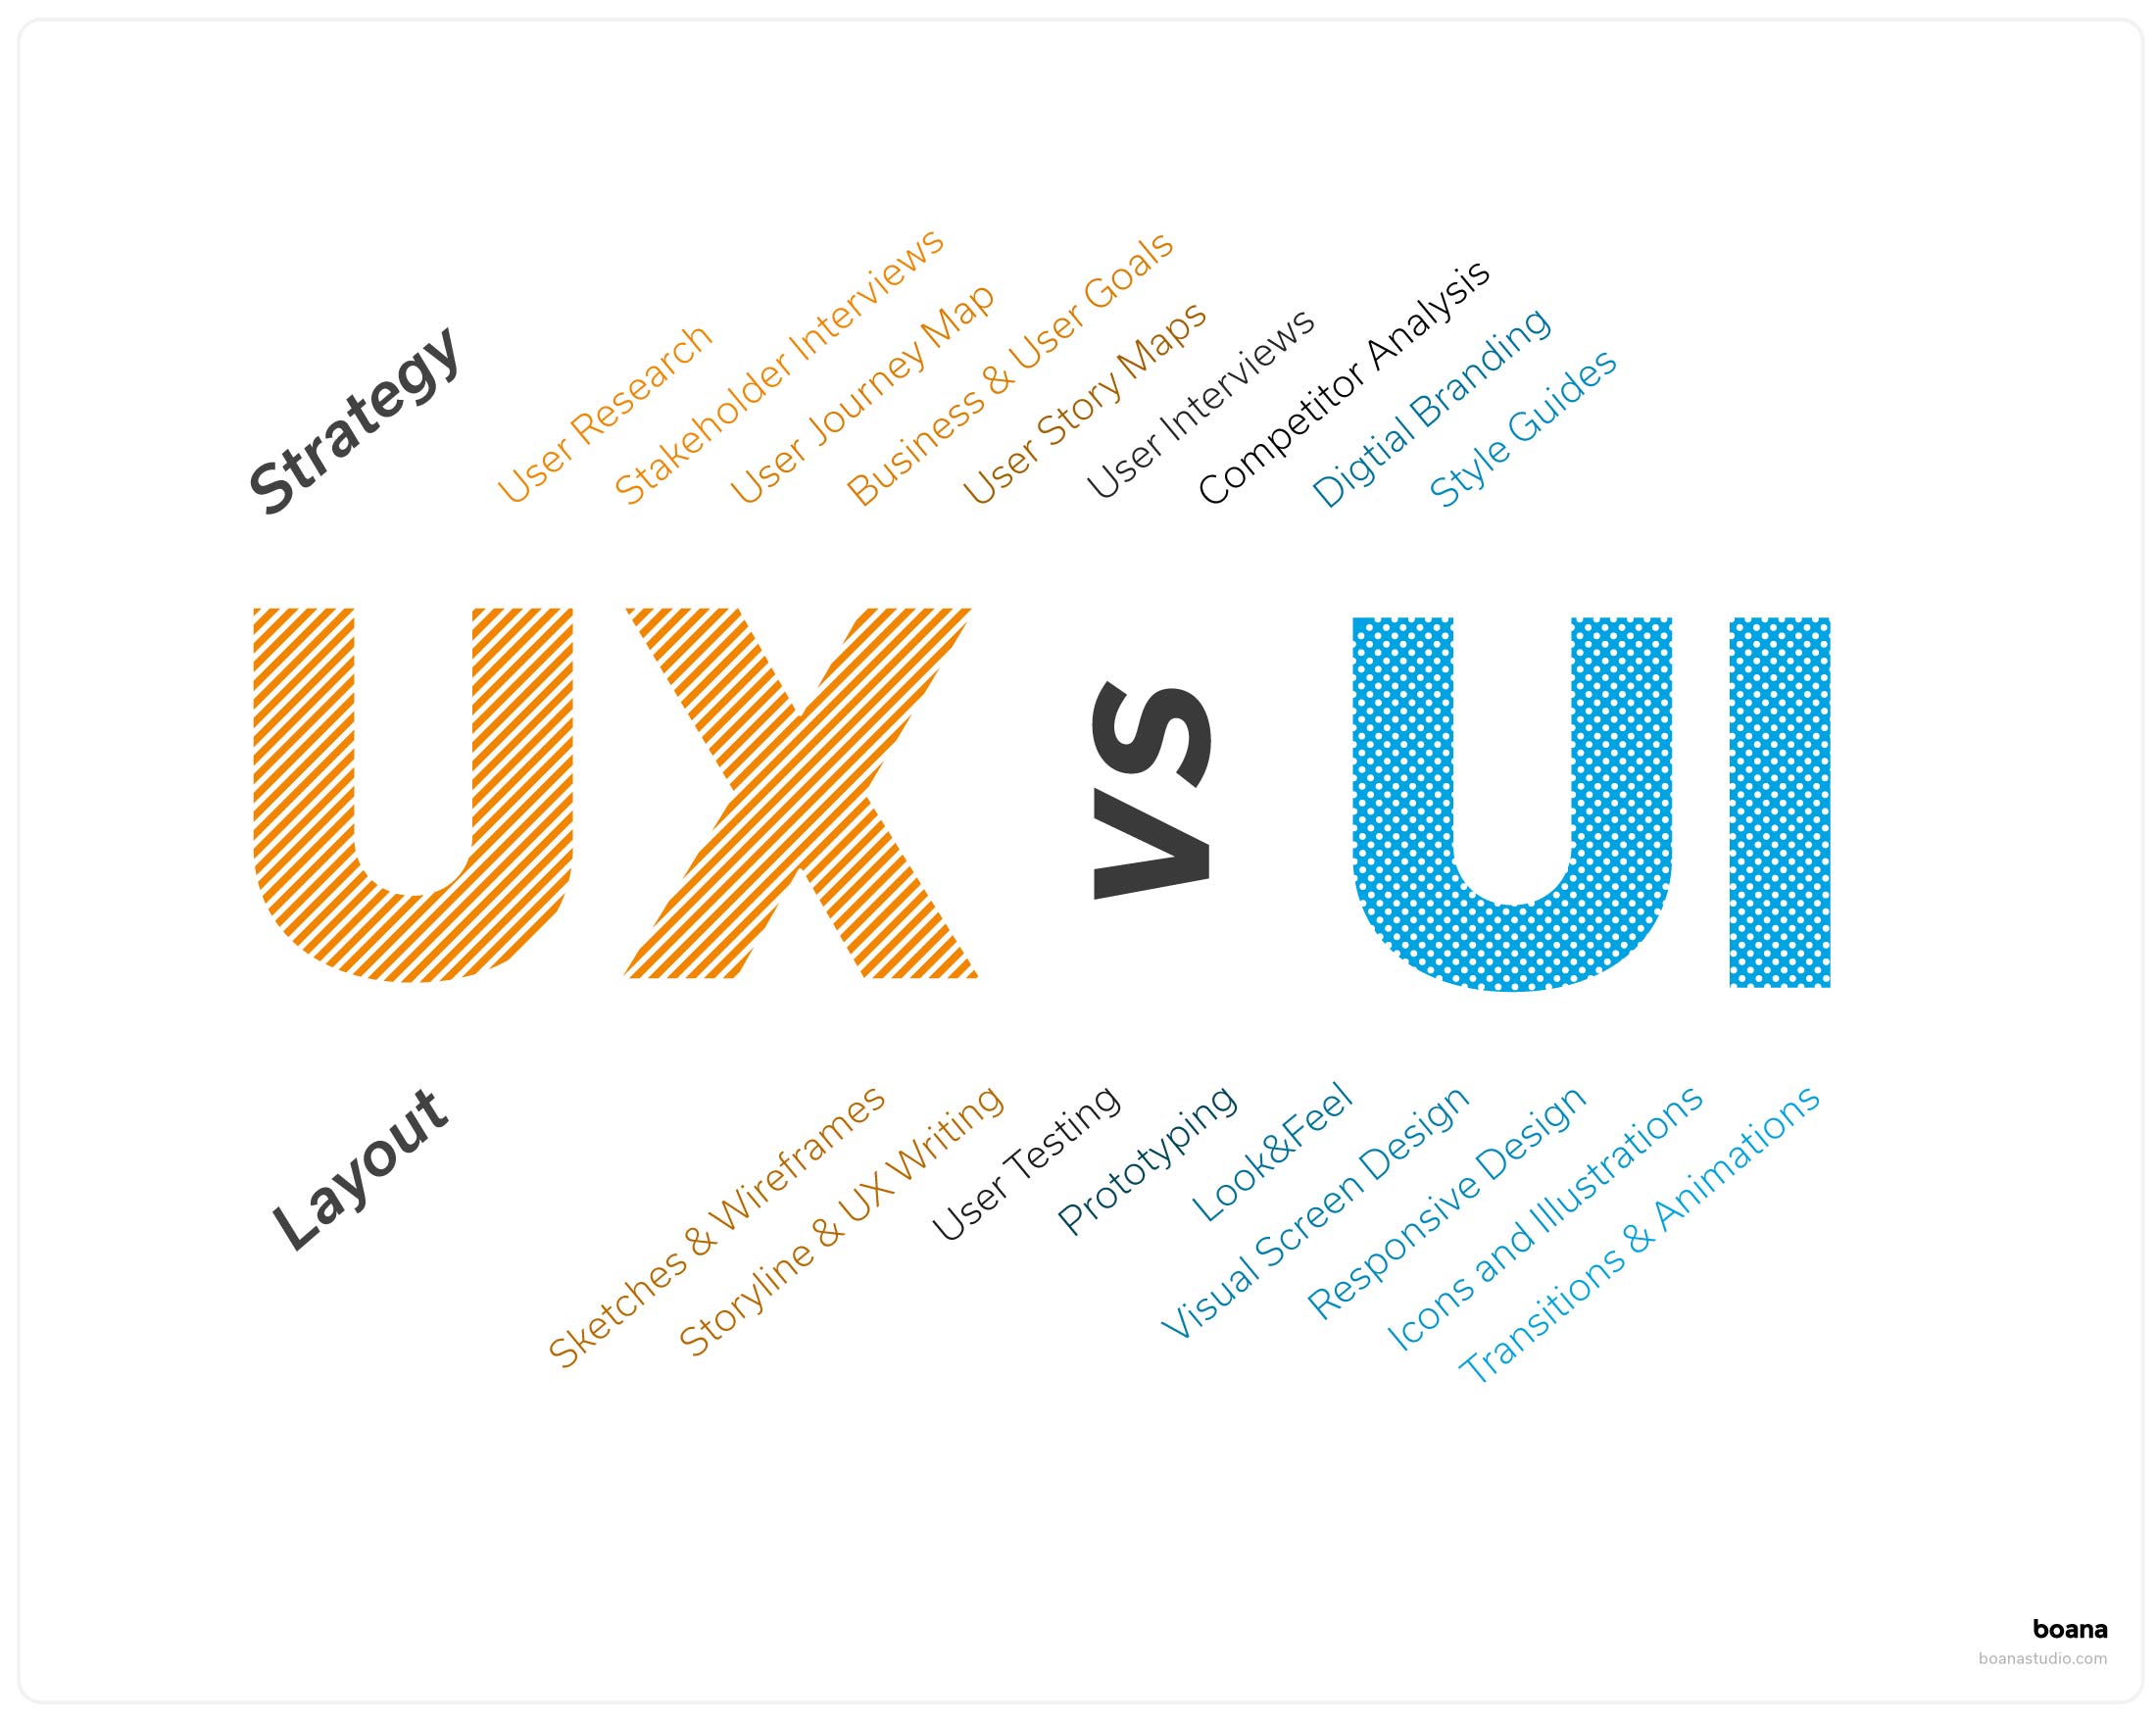 User Experience (UX) VS User Interface Design (UI): differences and similarities